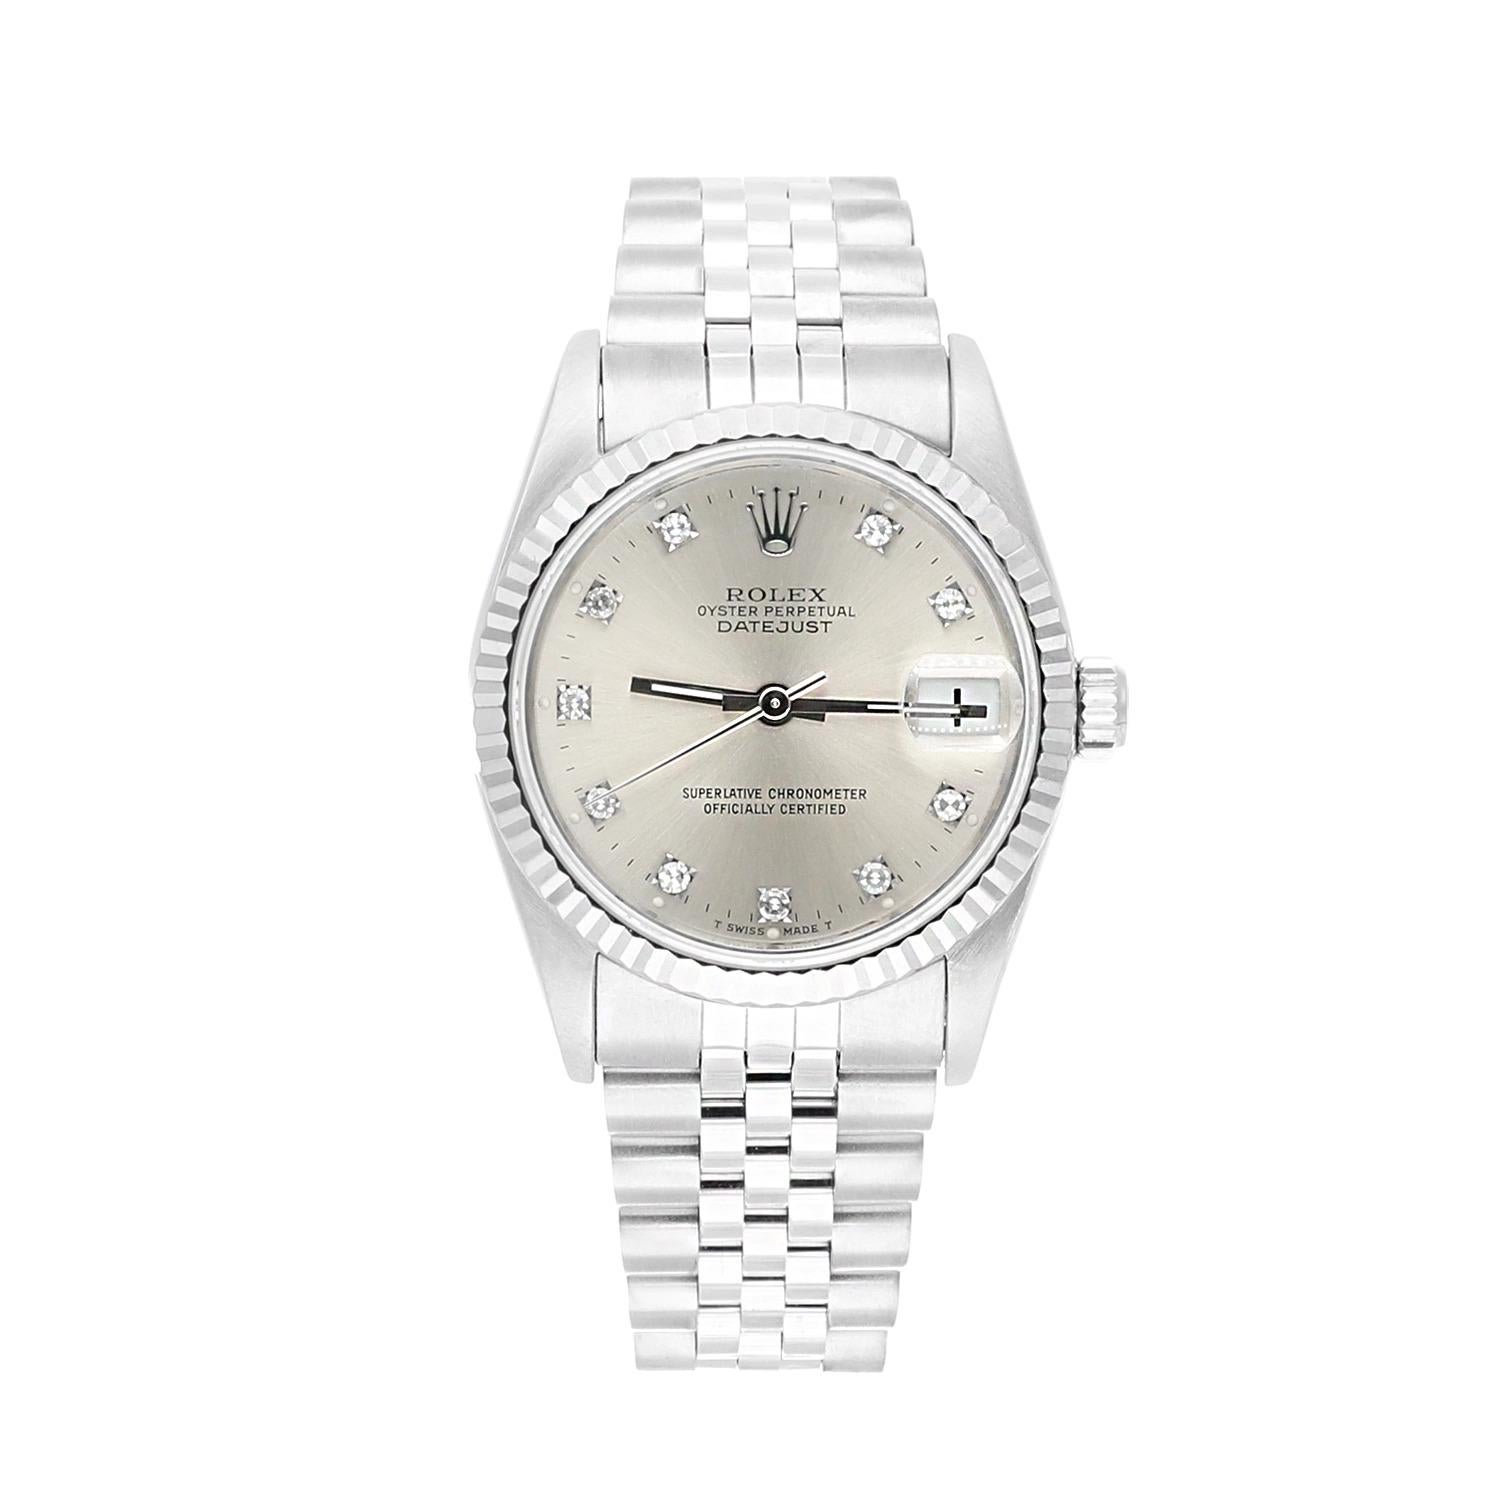 Rolex Datejust 31mm Silver Diamond Dial Stainless Steel Watch White Gold Bezel, N Serial.
This watch has been professionally polished, serviced and is in excellent overall condition. There are absolutely no visible scratches or blemishes.